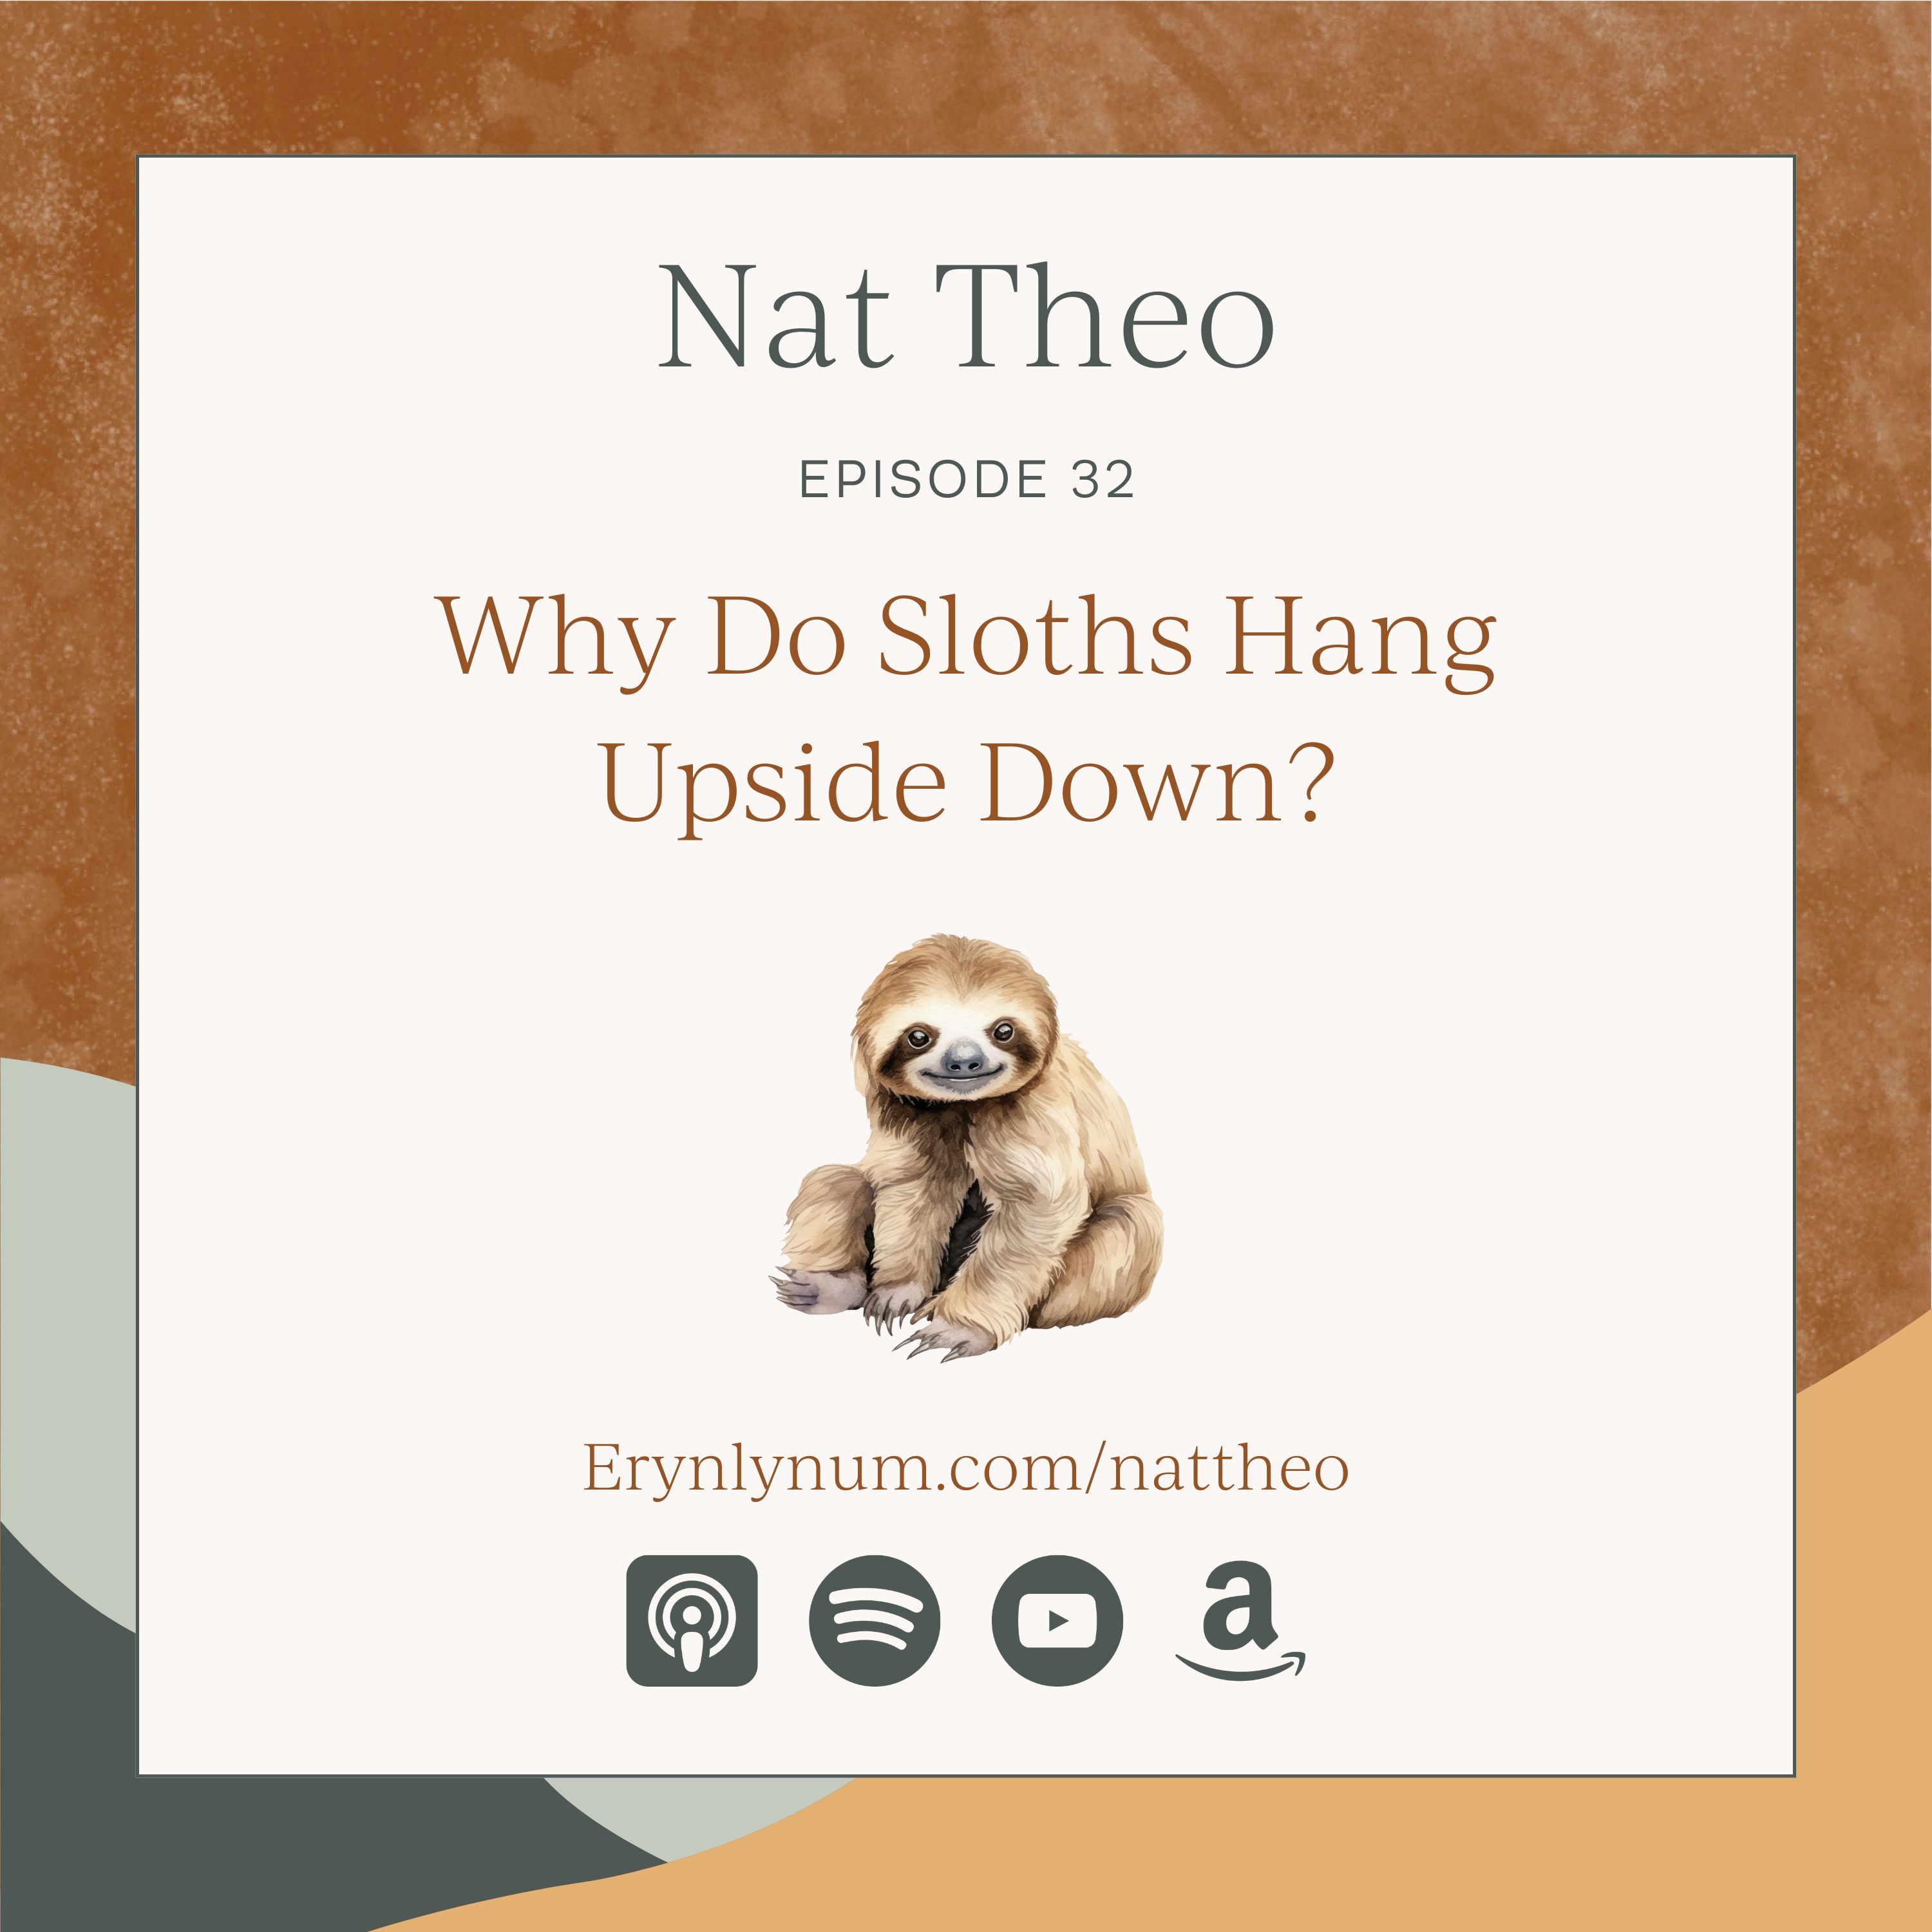 Why Do Sloths Hang Upside Down? Episode 32